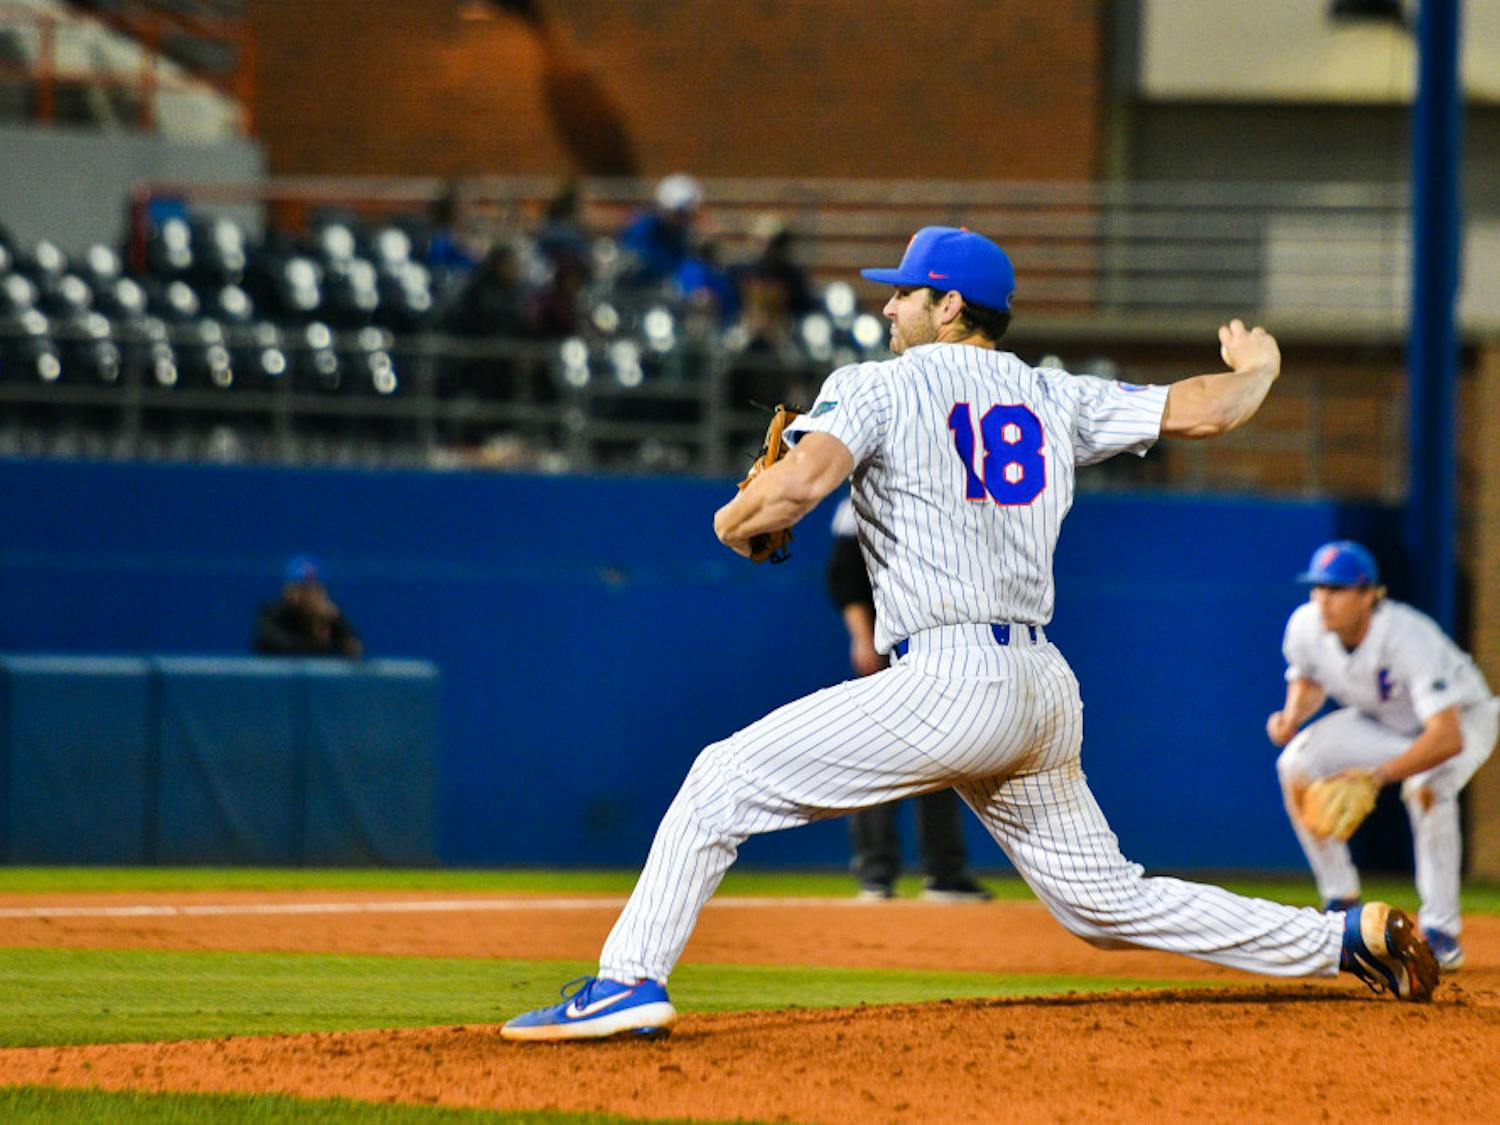 Florida Sunday starter Tyler Dyson is averaging 4.78 innings per start this season. He holds a 3-1 record through six starts, has a 5.34 ERA and has recorded 21 strikeouts in 2019. 